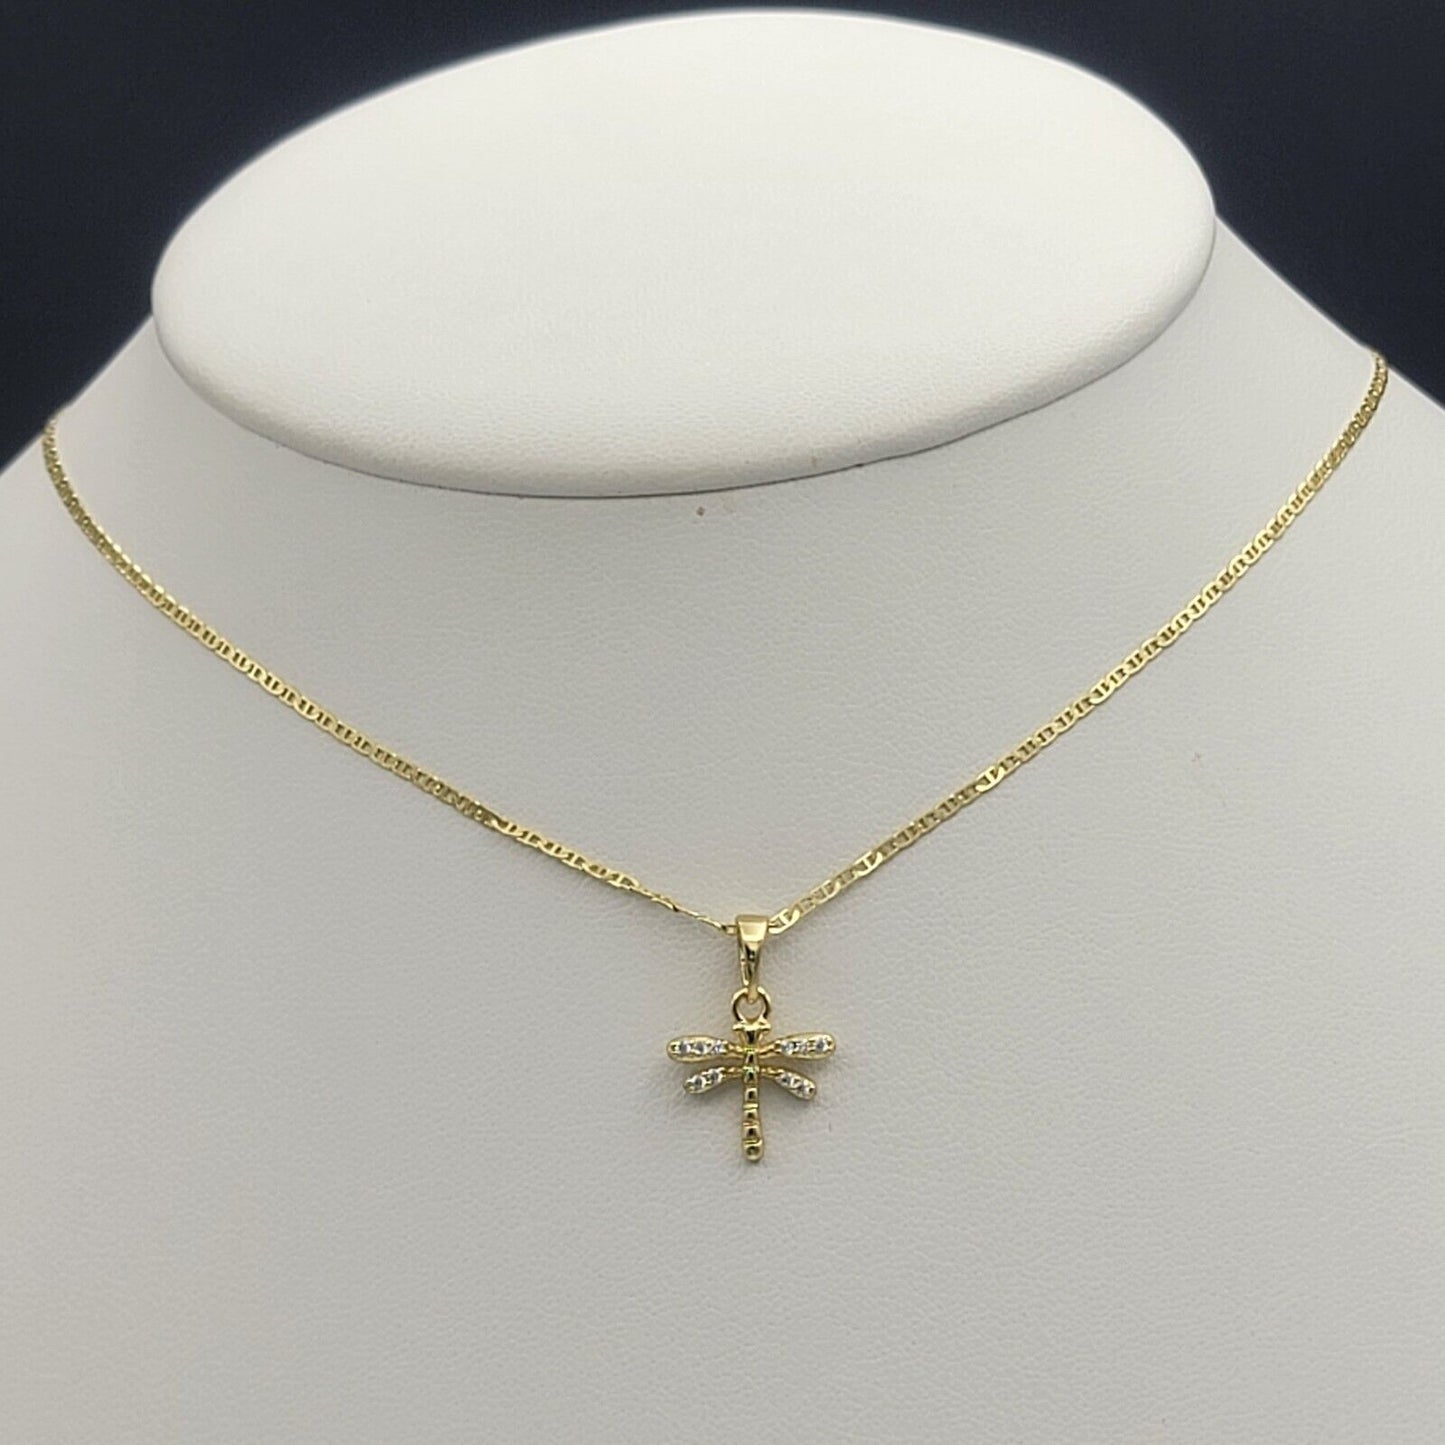 Necklaces - 14K Gold Plated. CZ dragonfly Pendant & Chain.